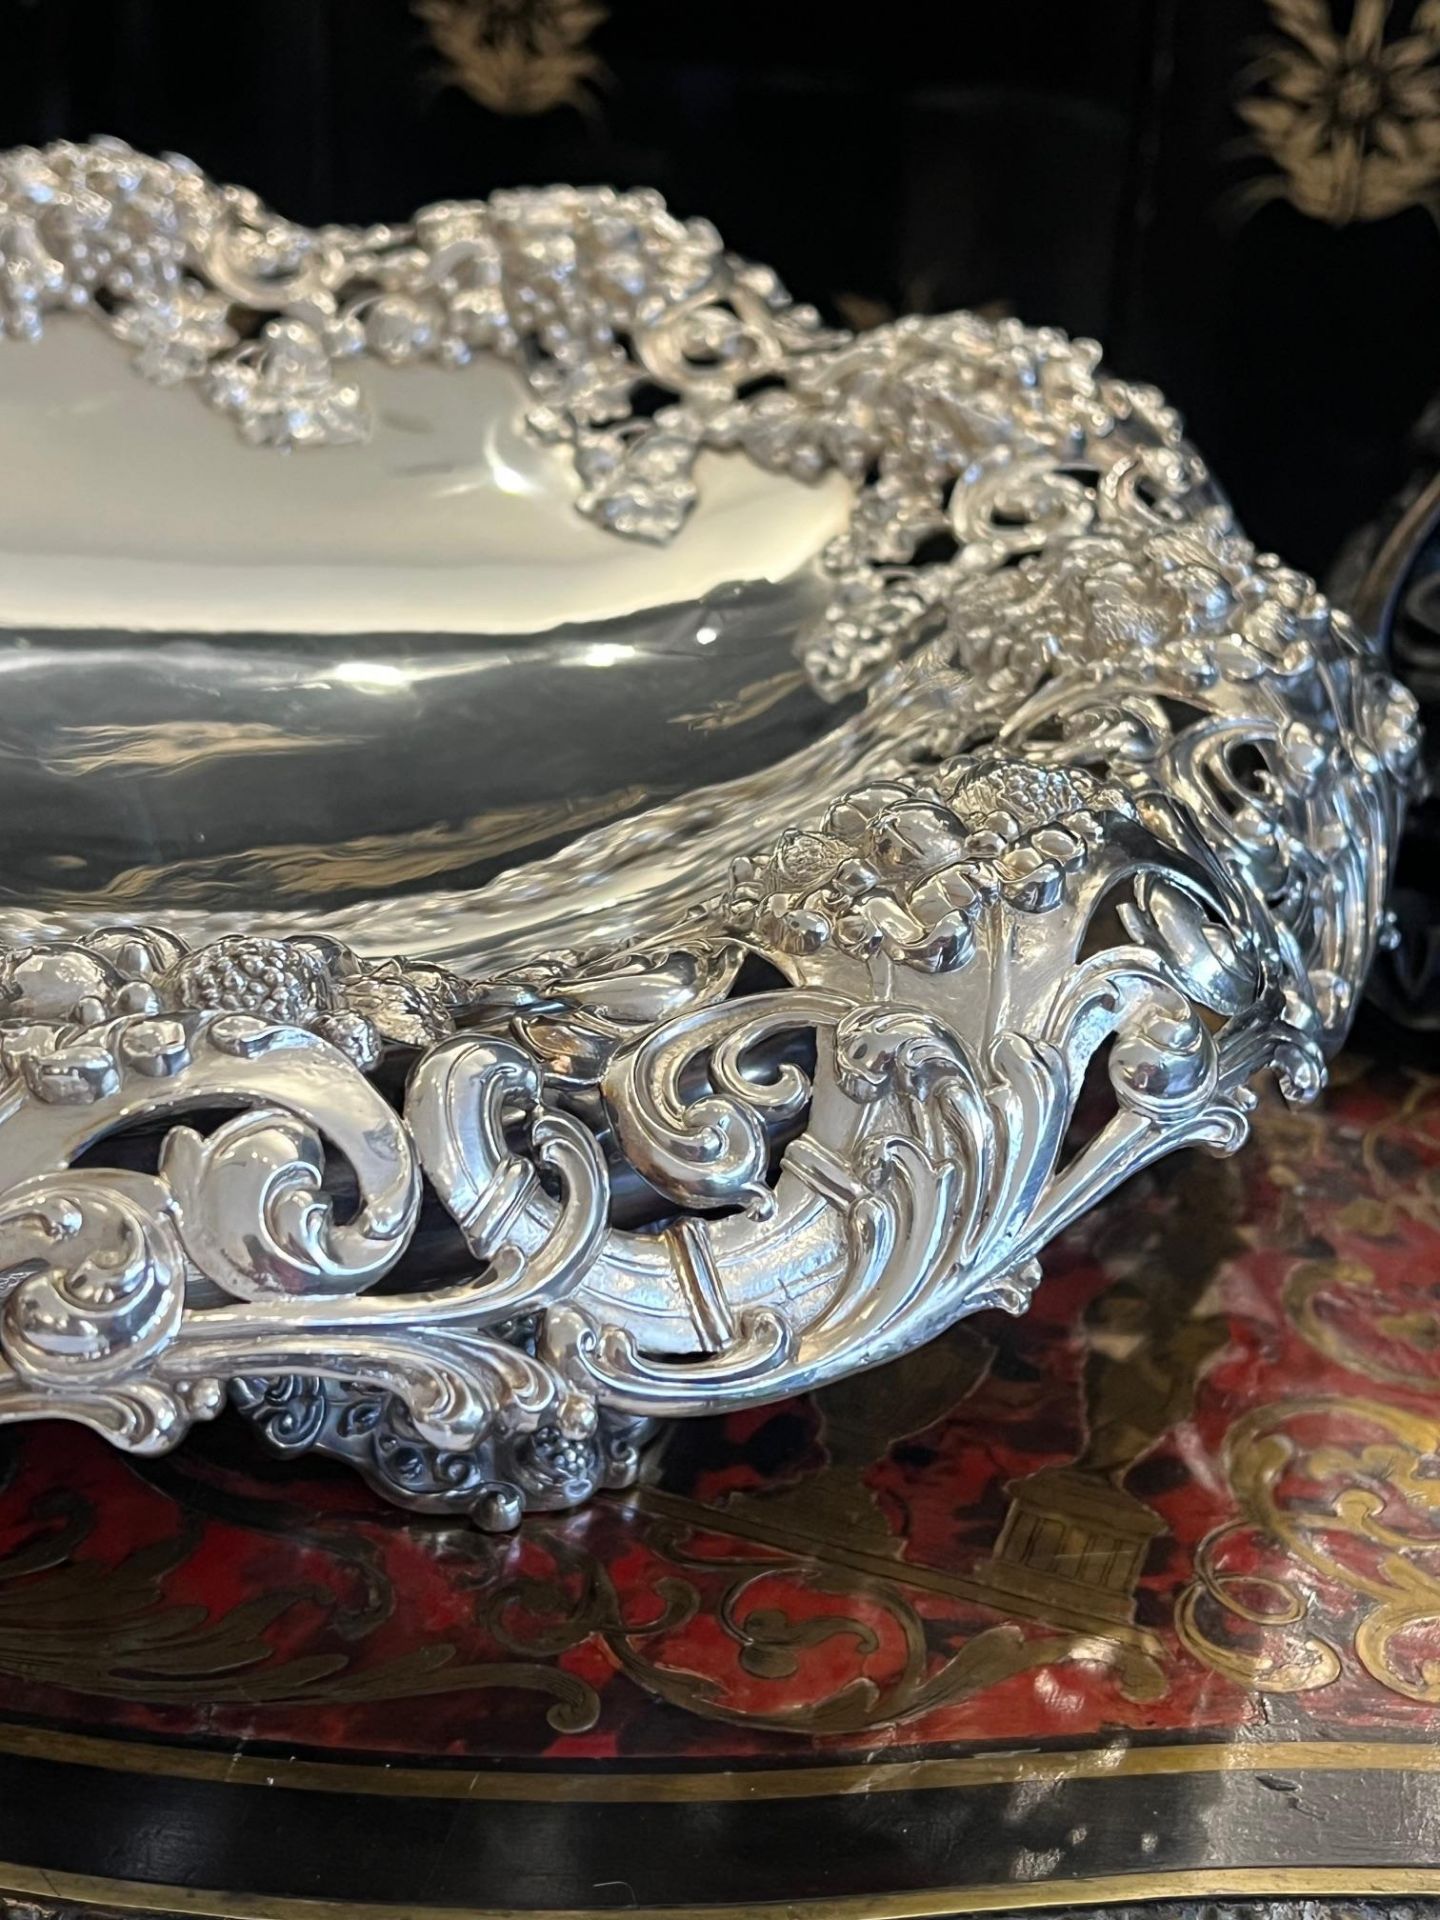 A VERY LARGE STERLING SILVER CENTREPIECE BY GORHAM, C. 1901 AMERICAN - Image 10 of 10